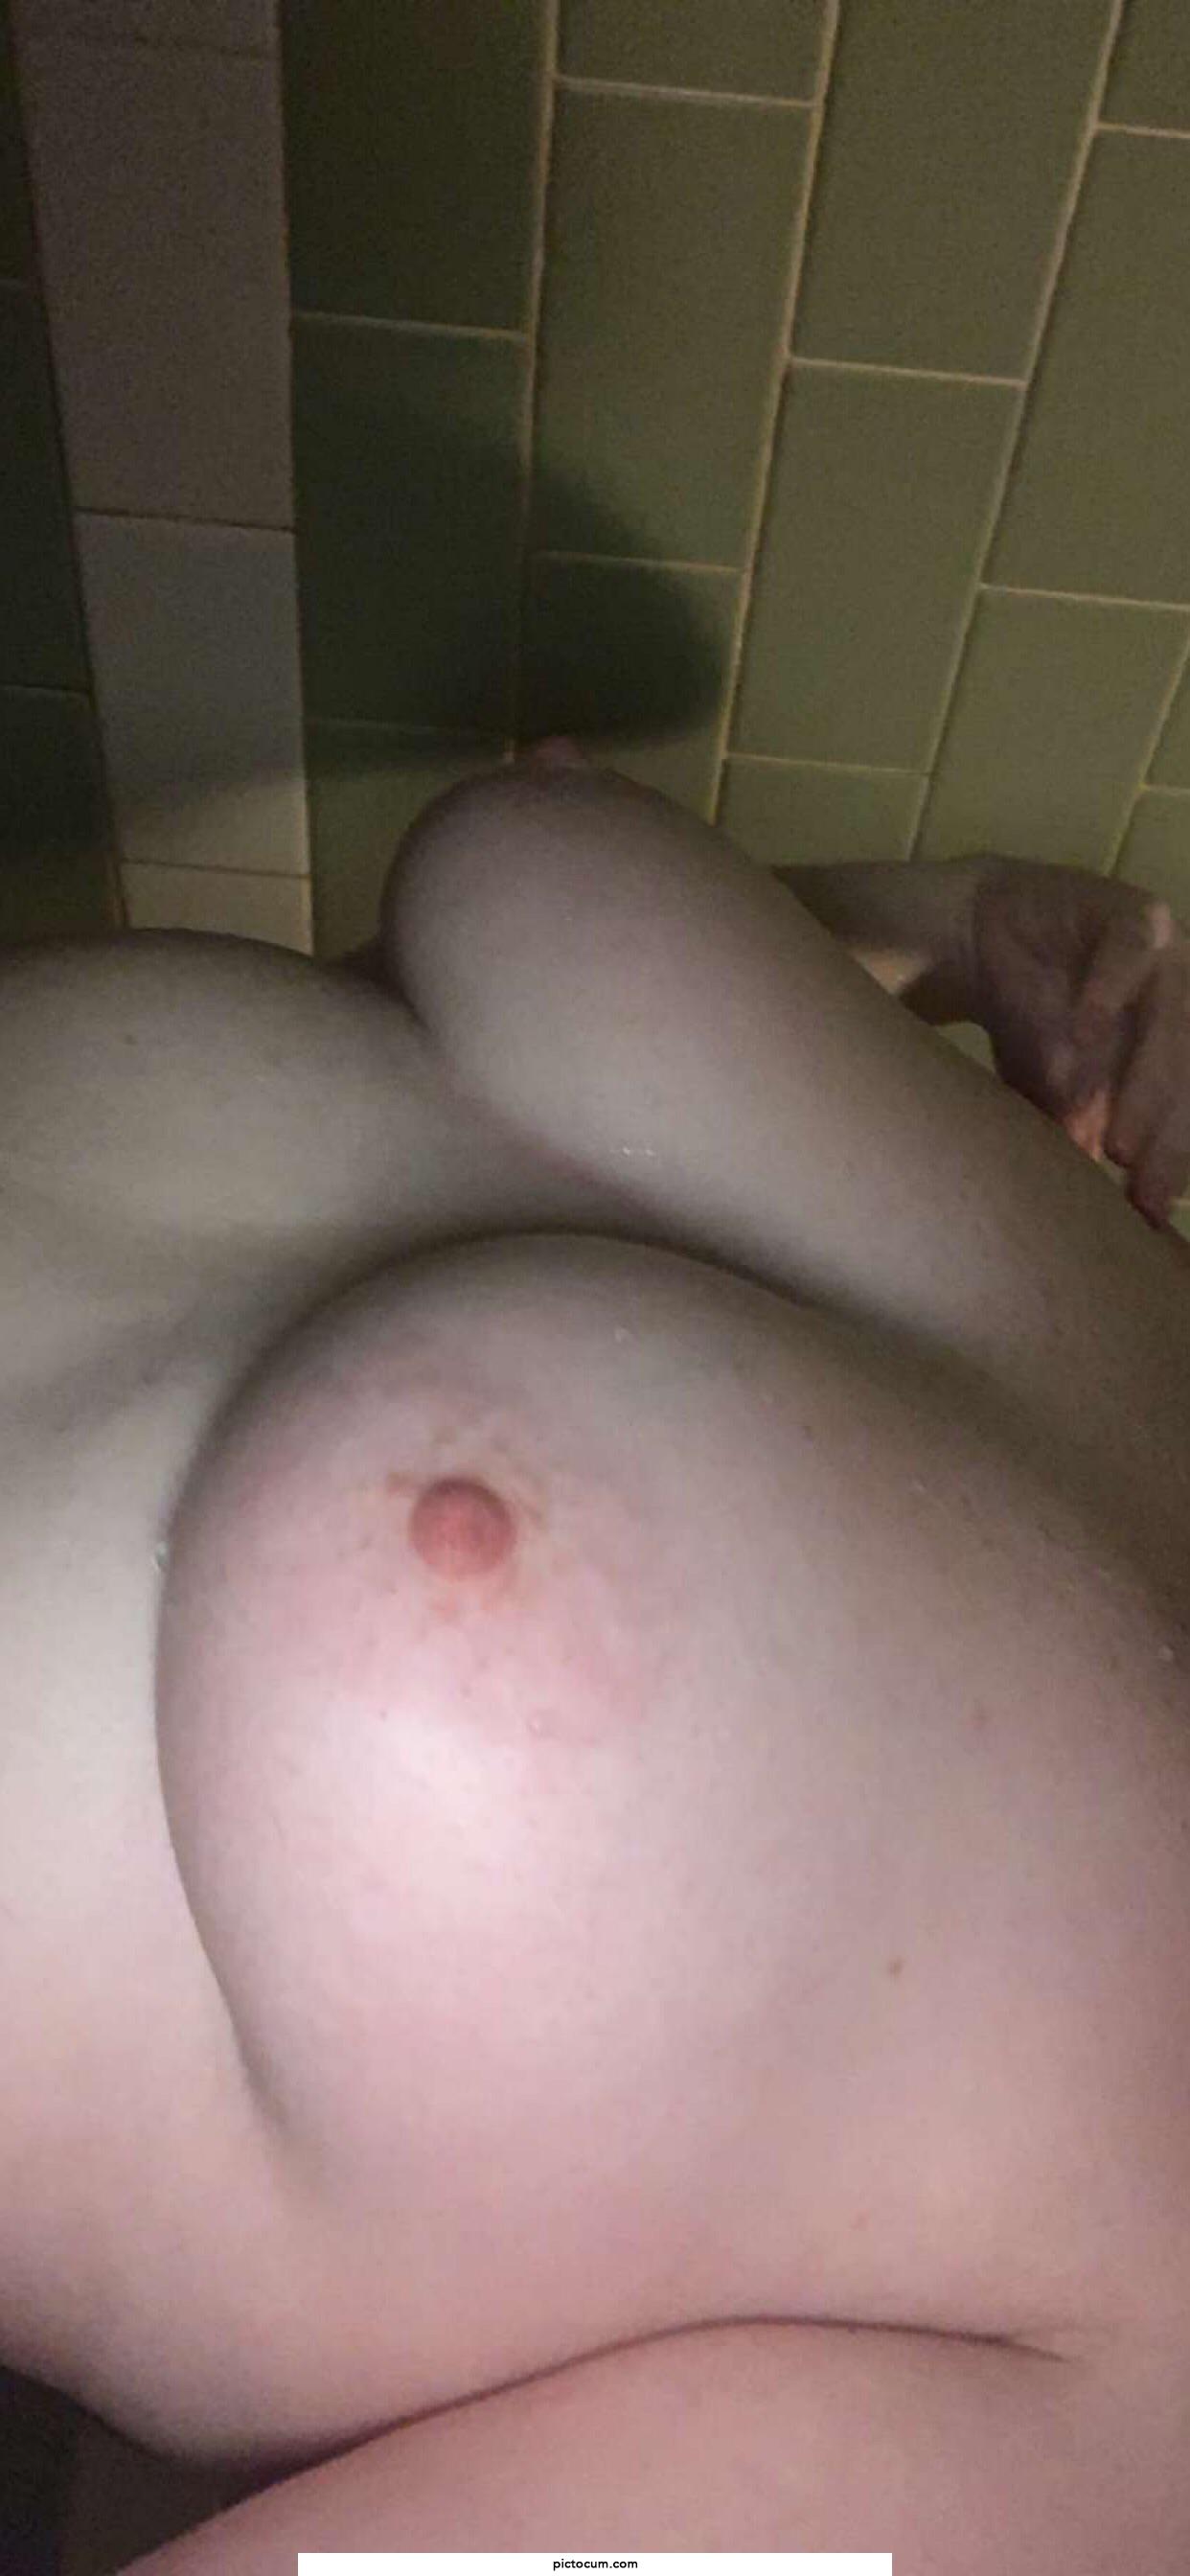 Wanna have some fun in the shower?